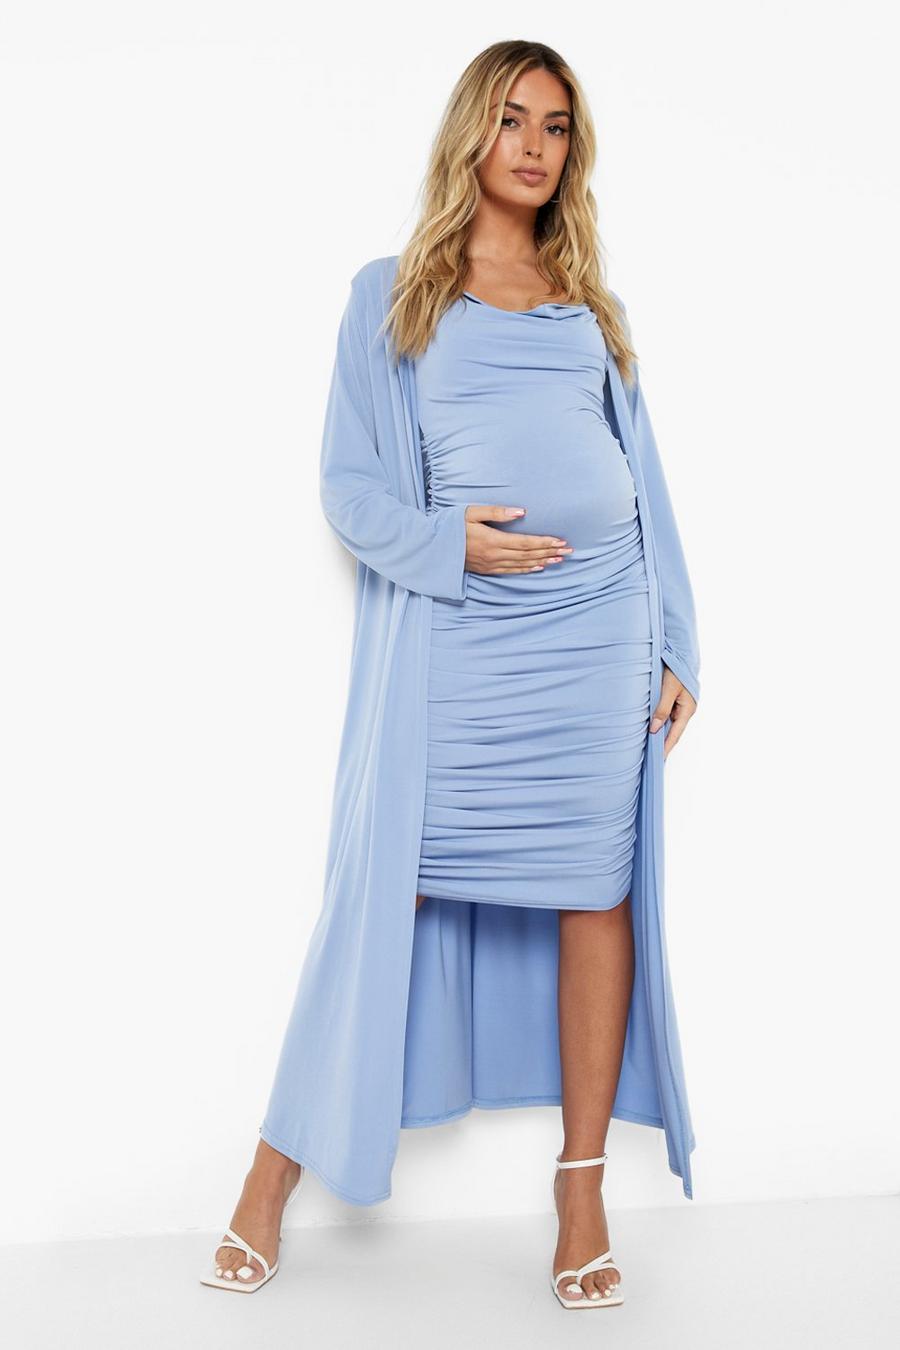 Blue azzurro Maternity Strappy Cowl Neck Dress And Duster Coat